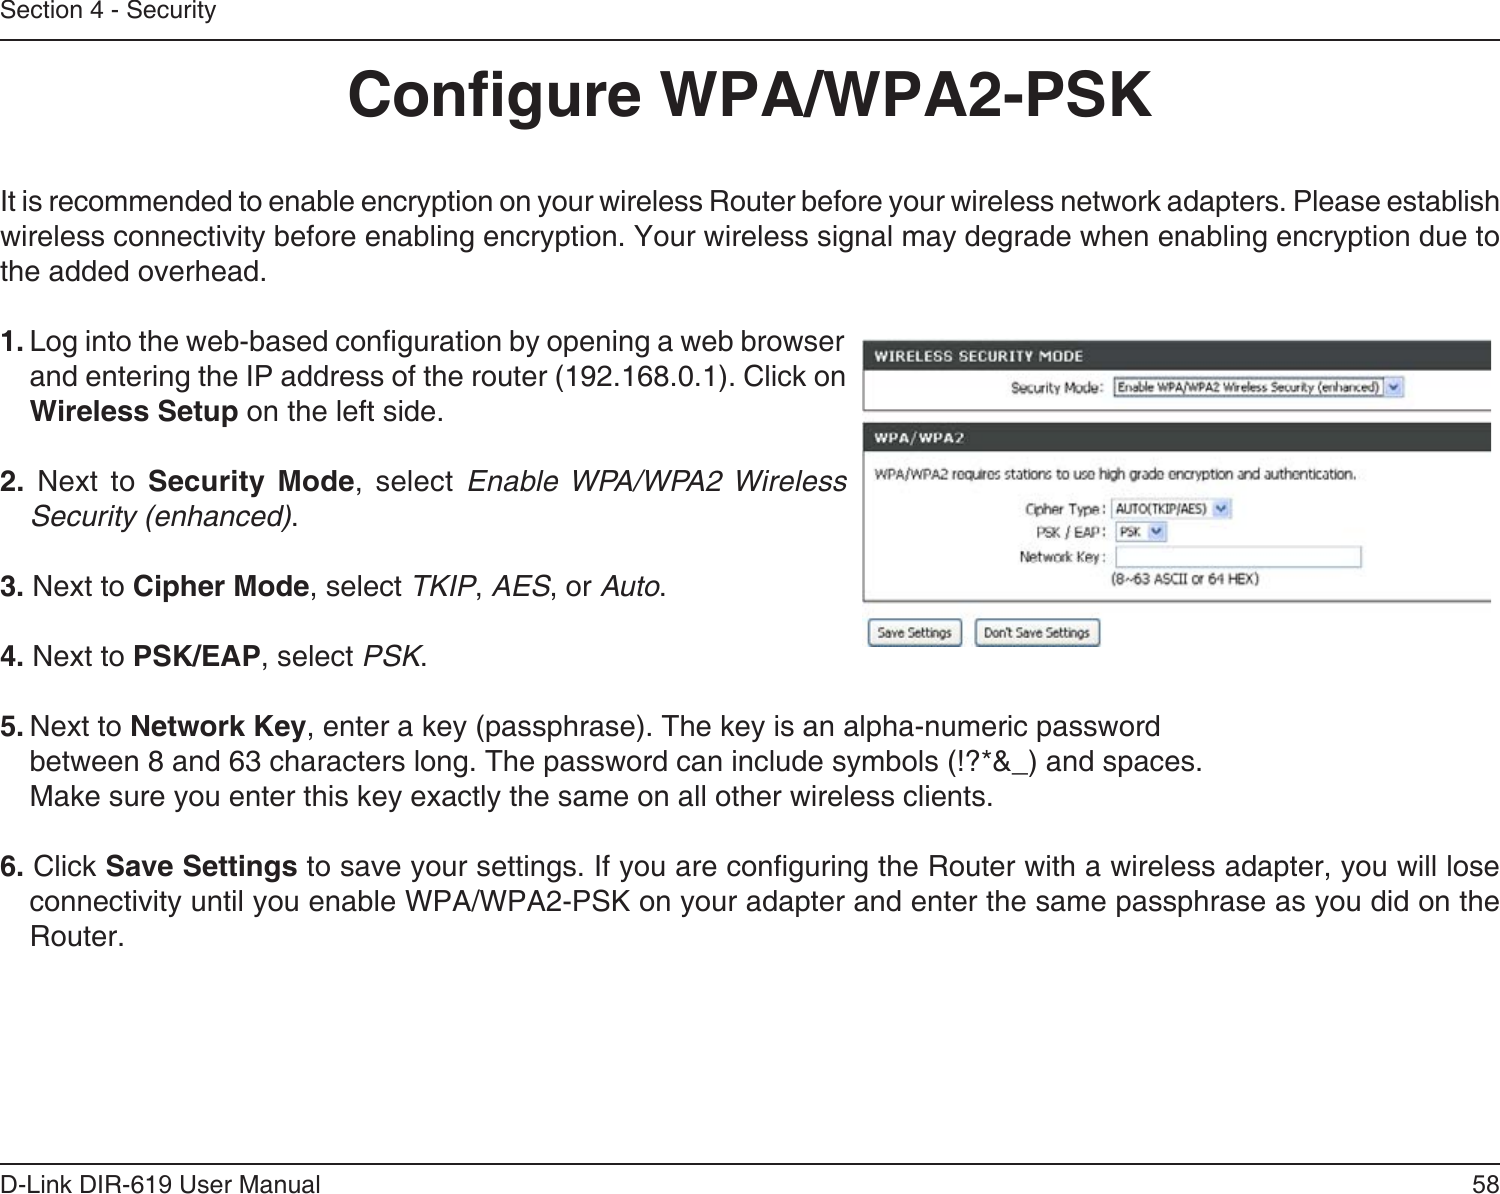 58D-Link DIR-619 User ManualSection 4 - SecurityCongure WPA/WPA2-PSKIt is recommended to enable encryption on your wireless Router before your wireless network adapters. Please establishwireless connectivity before enabling encryption. Your wireless signal may degrade when enabling encryption due tothe added overhead.1. Log into the web-based conguration by opening a web browser and entering the IP address of the router (192.168.0.1). Click onWireless Setup on the left side.2. Next to Security Mode, select Enable WPA/WPA2 WirelessSecurity (enhanced).3. Next to Cipher Mode, select TKIP, AES, or Auto.4. Next to PSK/EAP, select PSK.5. Next to Network Key, enter a key (passphrase). The key is an alpha-numeric passwordbetween 8 and 63 characters long. The password can include symbols (!?*&amp;_) and spaces.Make sure you enter this key exactly the same on all other wireless clients.6. Click Save Settings to save your settings. If you are conguring the Router with a wireless adapter, you will lose connectivity until you enable WPA/WPA2-PSK on your adapter and enter the same passphrase as you did on the Router.